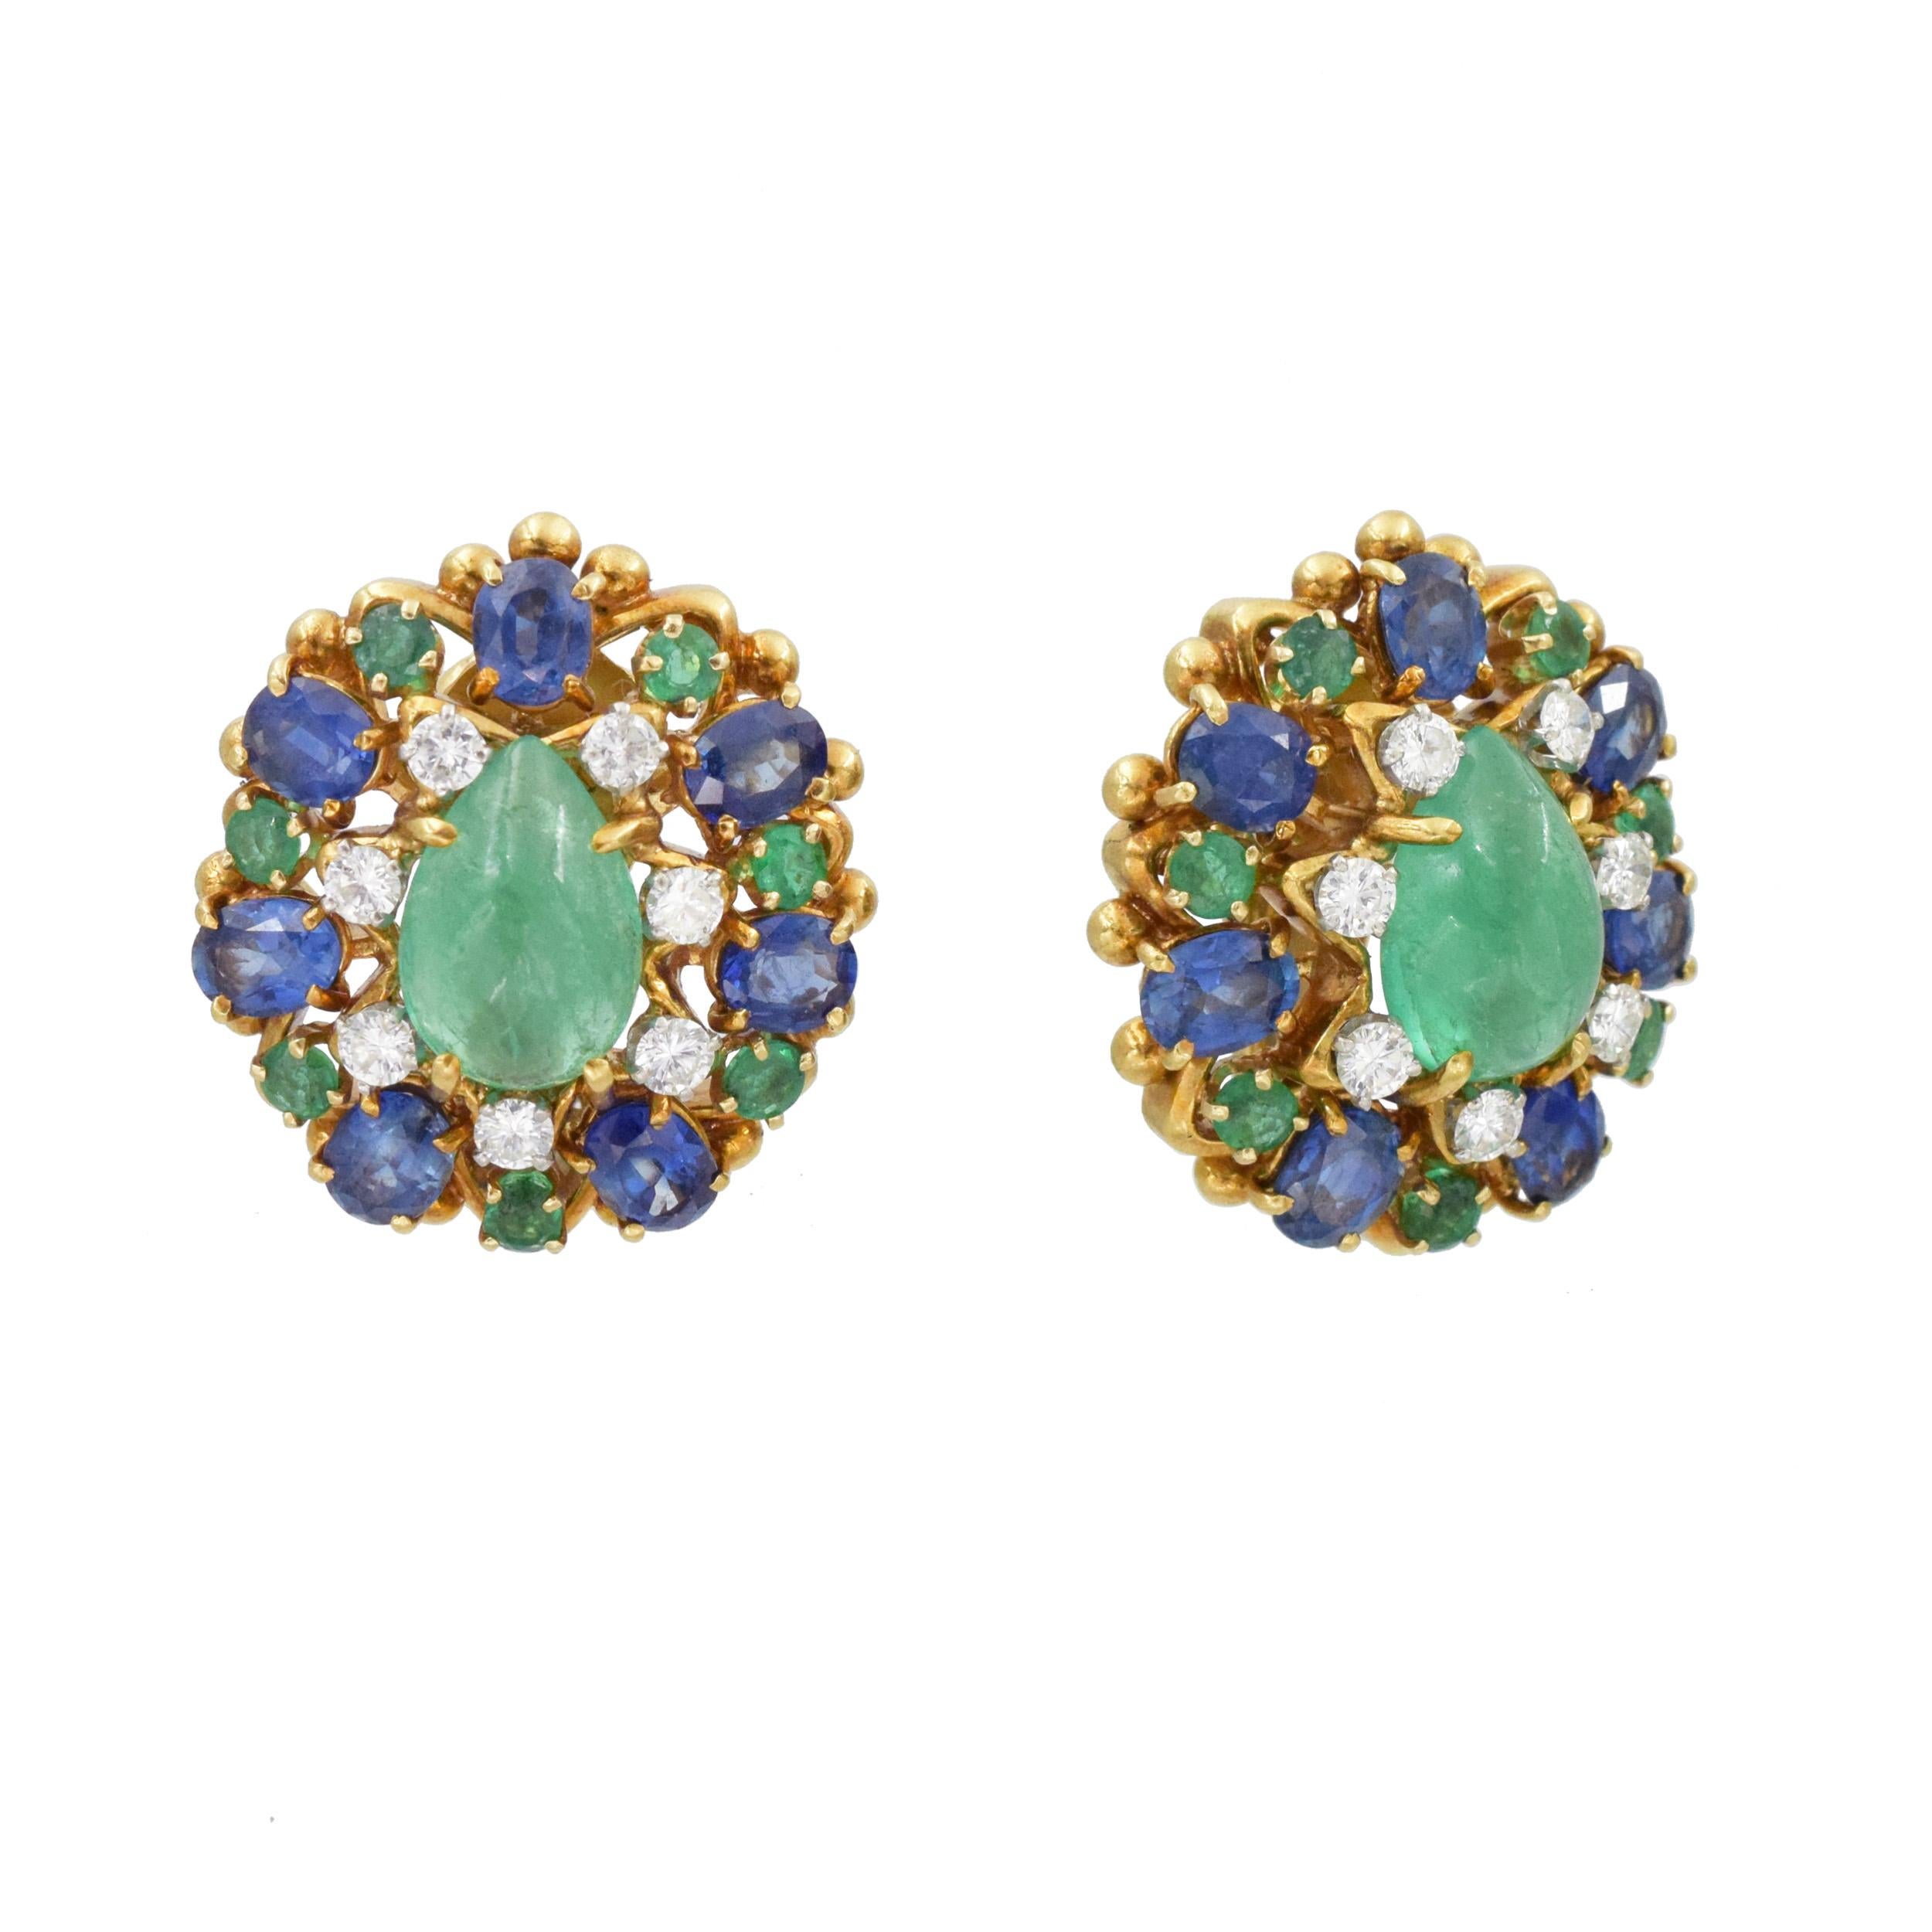 David Webb Diamond, Emerald, and Sapphire Cabochon Earrings.
Set with 2 Pear Shaped Cabochon Emeralds approximately 6.0 -7.0ct total weight. These earrings also have 14 round brilliant diamonds that weigh approximately 0.65ct. Color: F/G. Clarity: